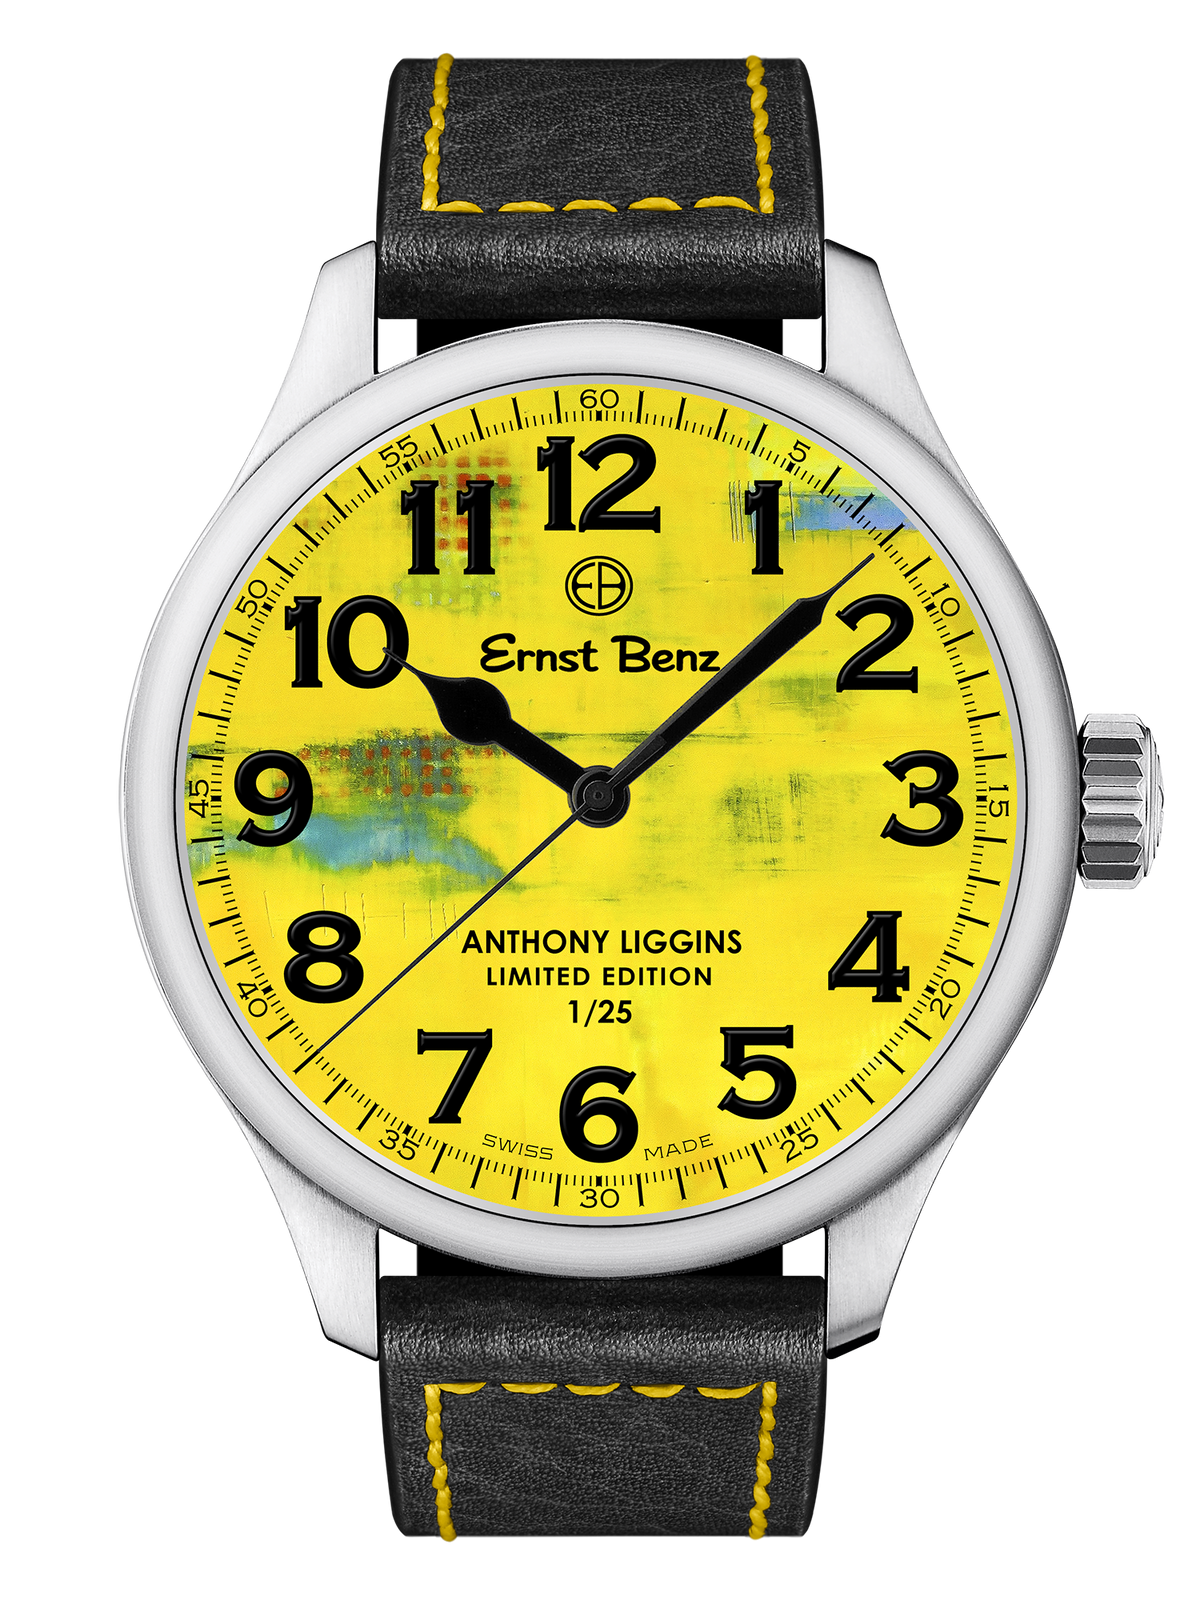 Ernst Benz Anthony Liggins Yellow Abstract Limited Edition 47mm Men's Watch GC10200/AL3